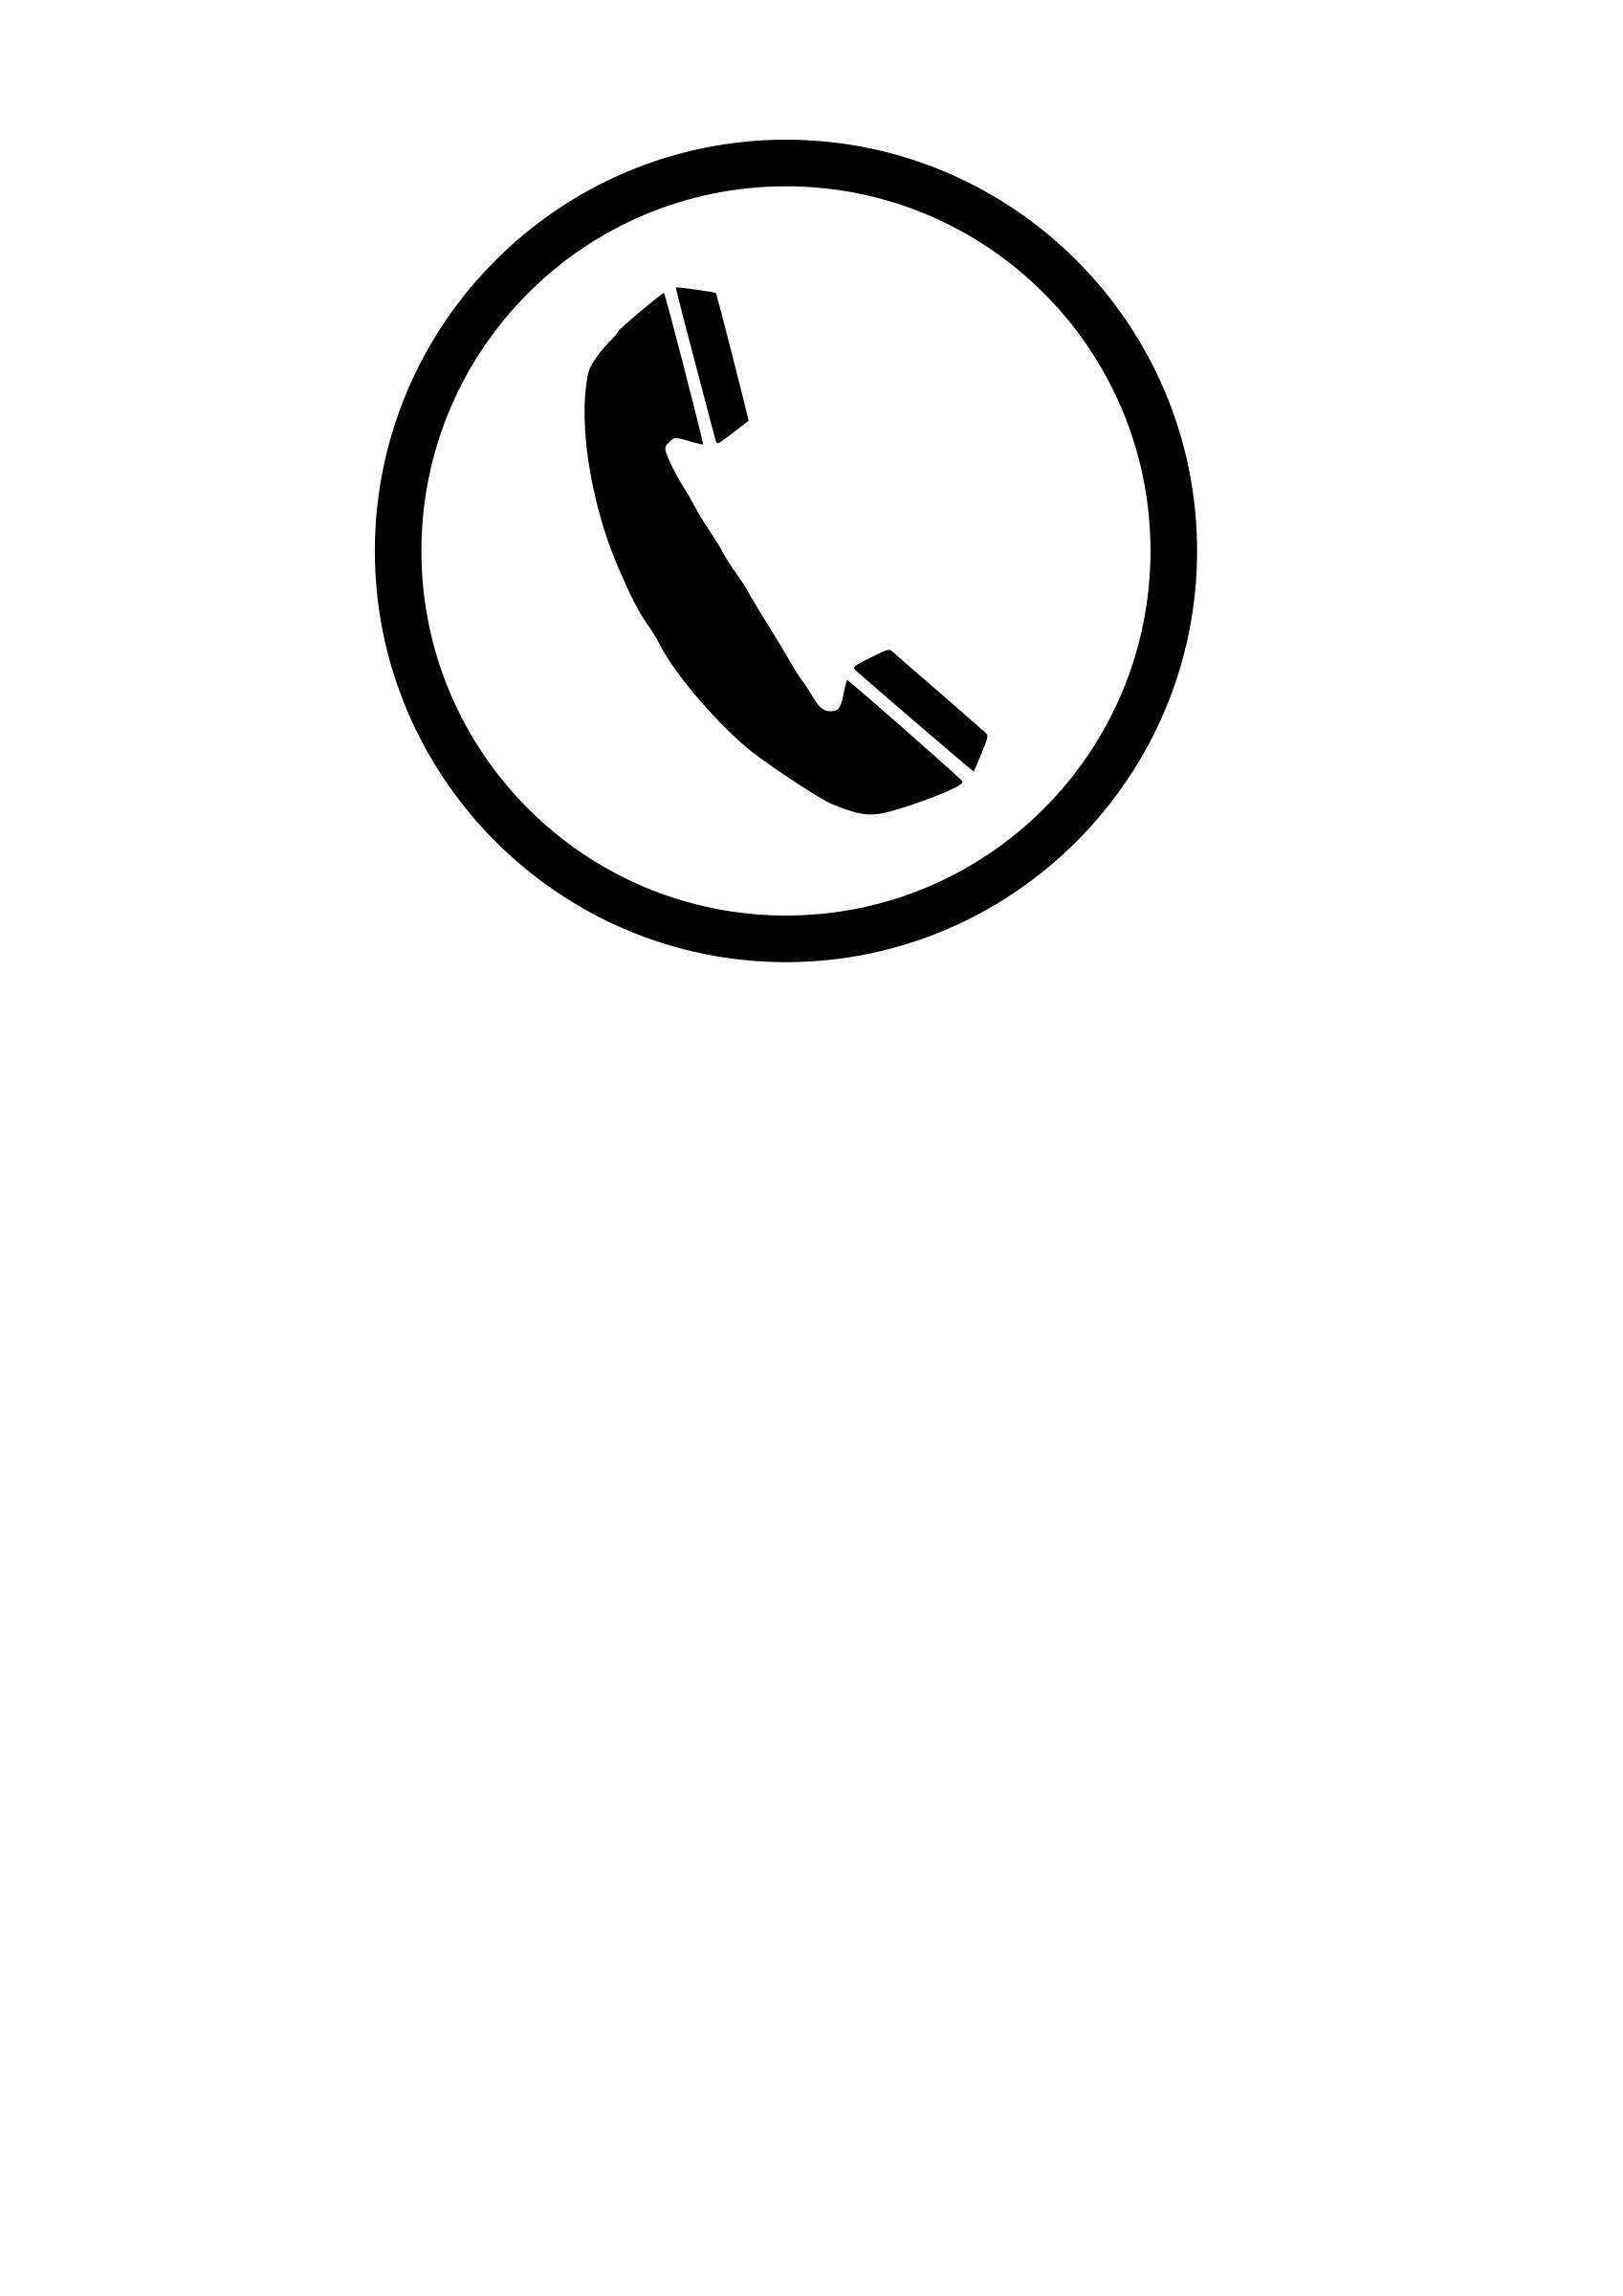 Small Phone Logo - Clipart - phone sign